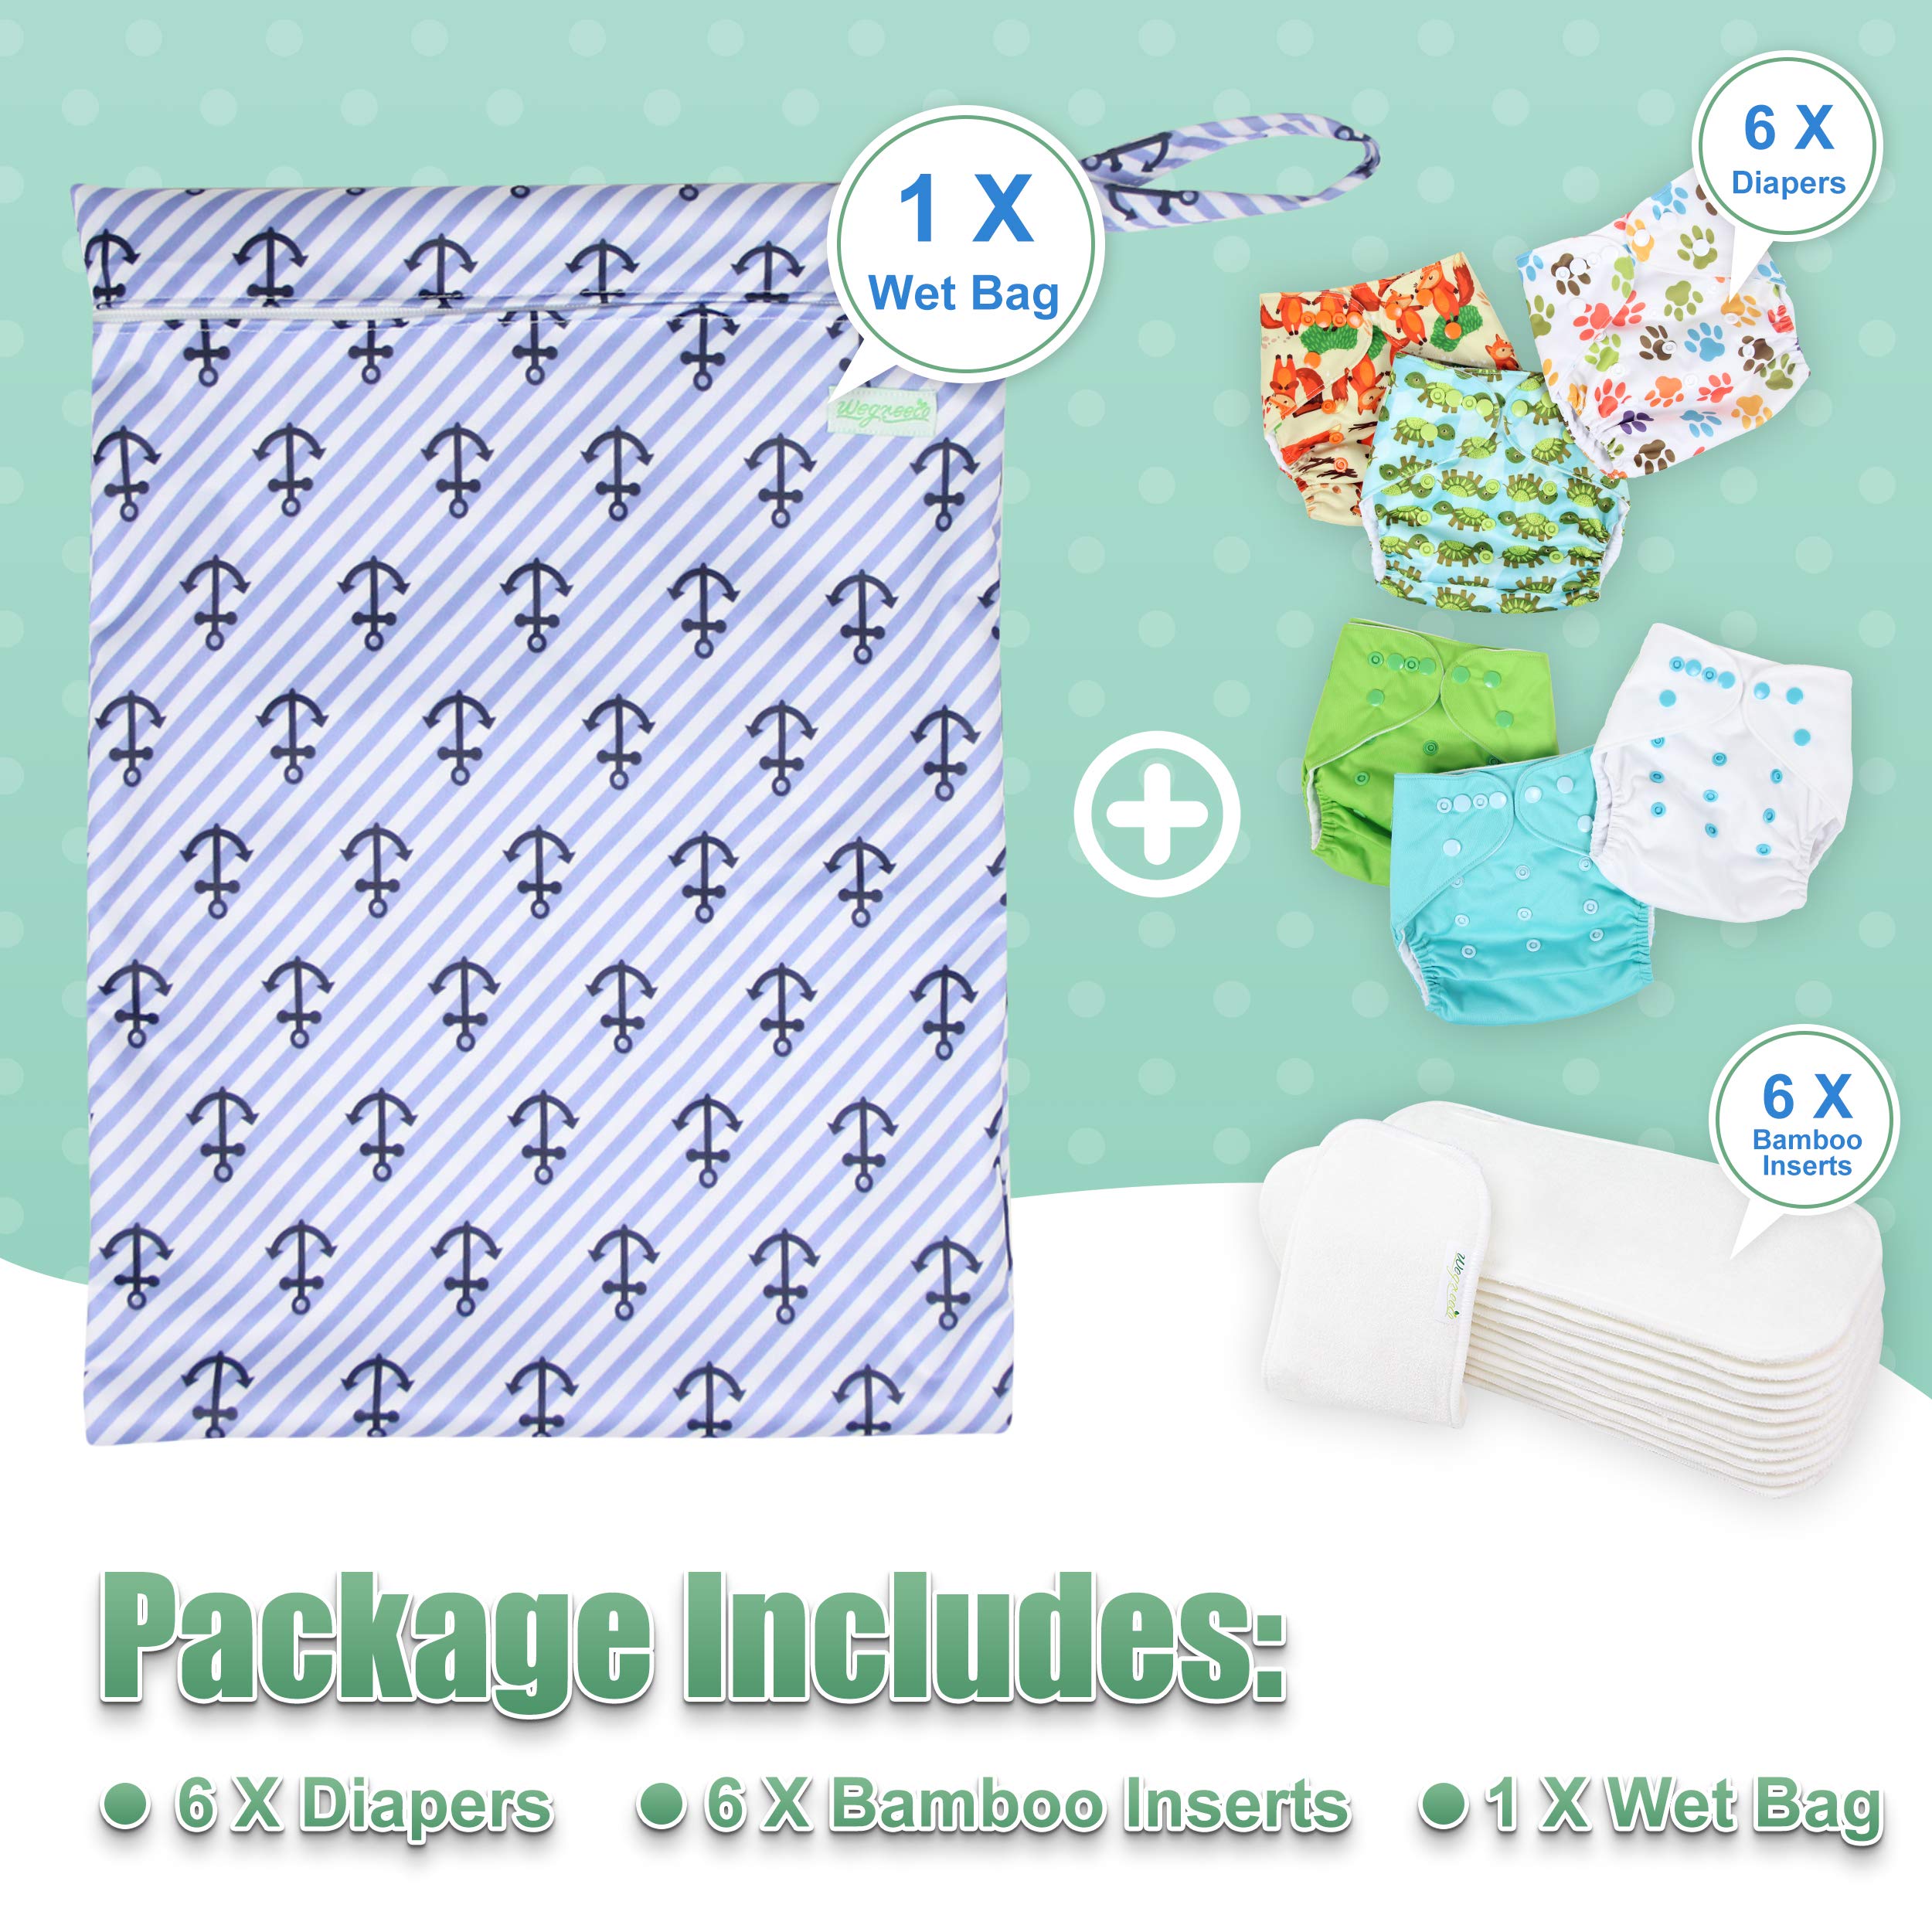 Wegreeco Washable Reusable Baby Cloth Pocket Diapers 6 Pack + 6 Bamboo Inserts (with 1 Wet Bag,Neutral Prints)